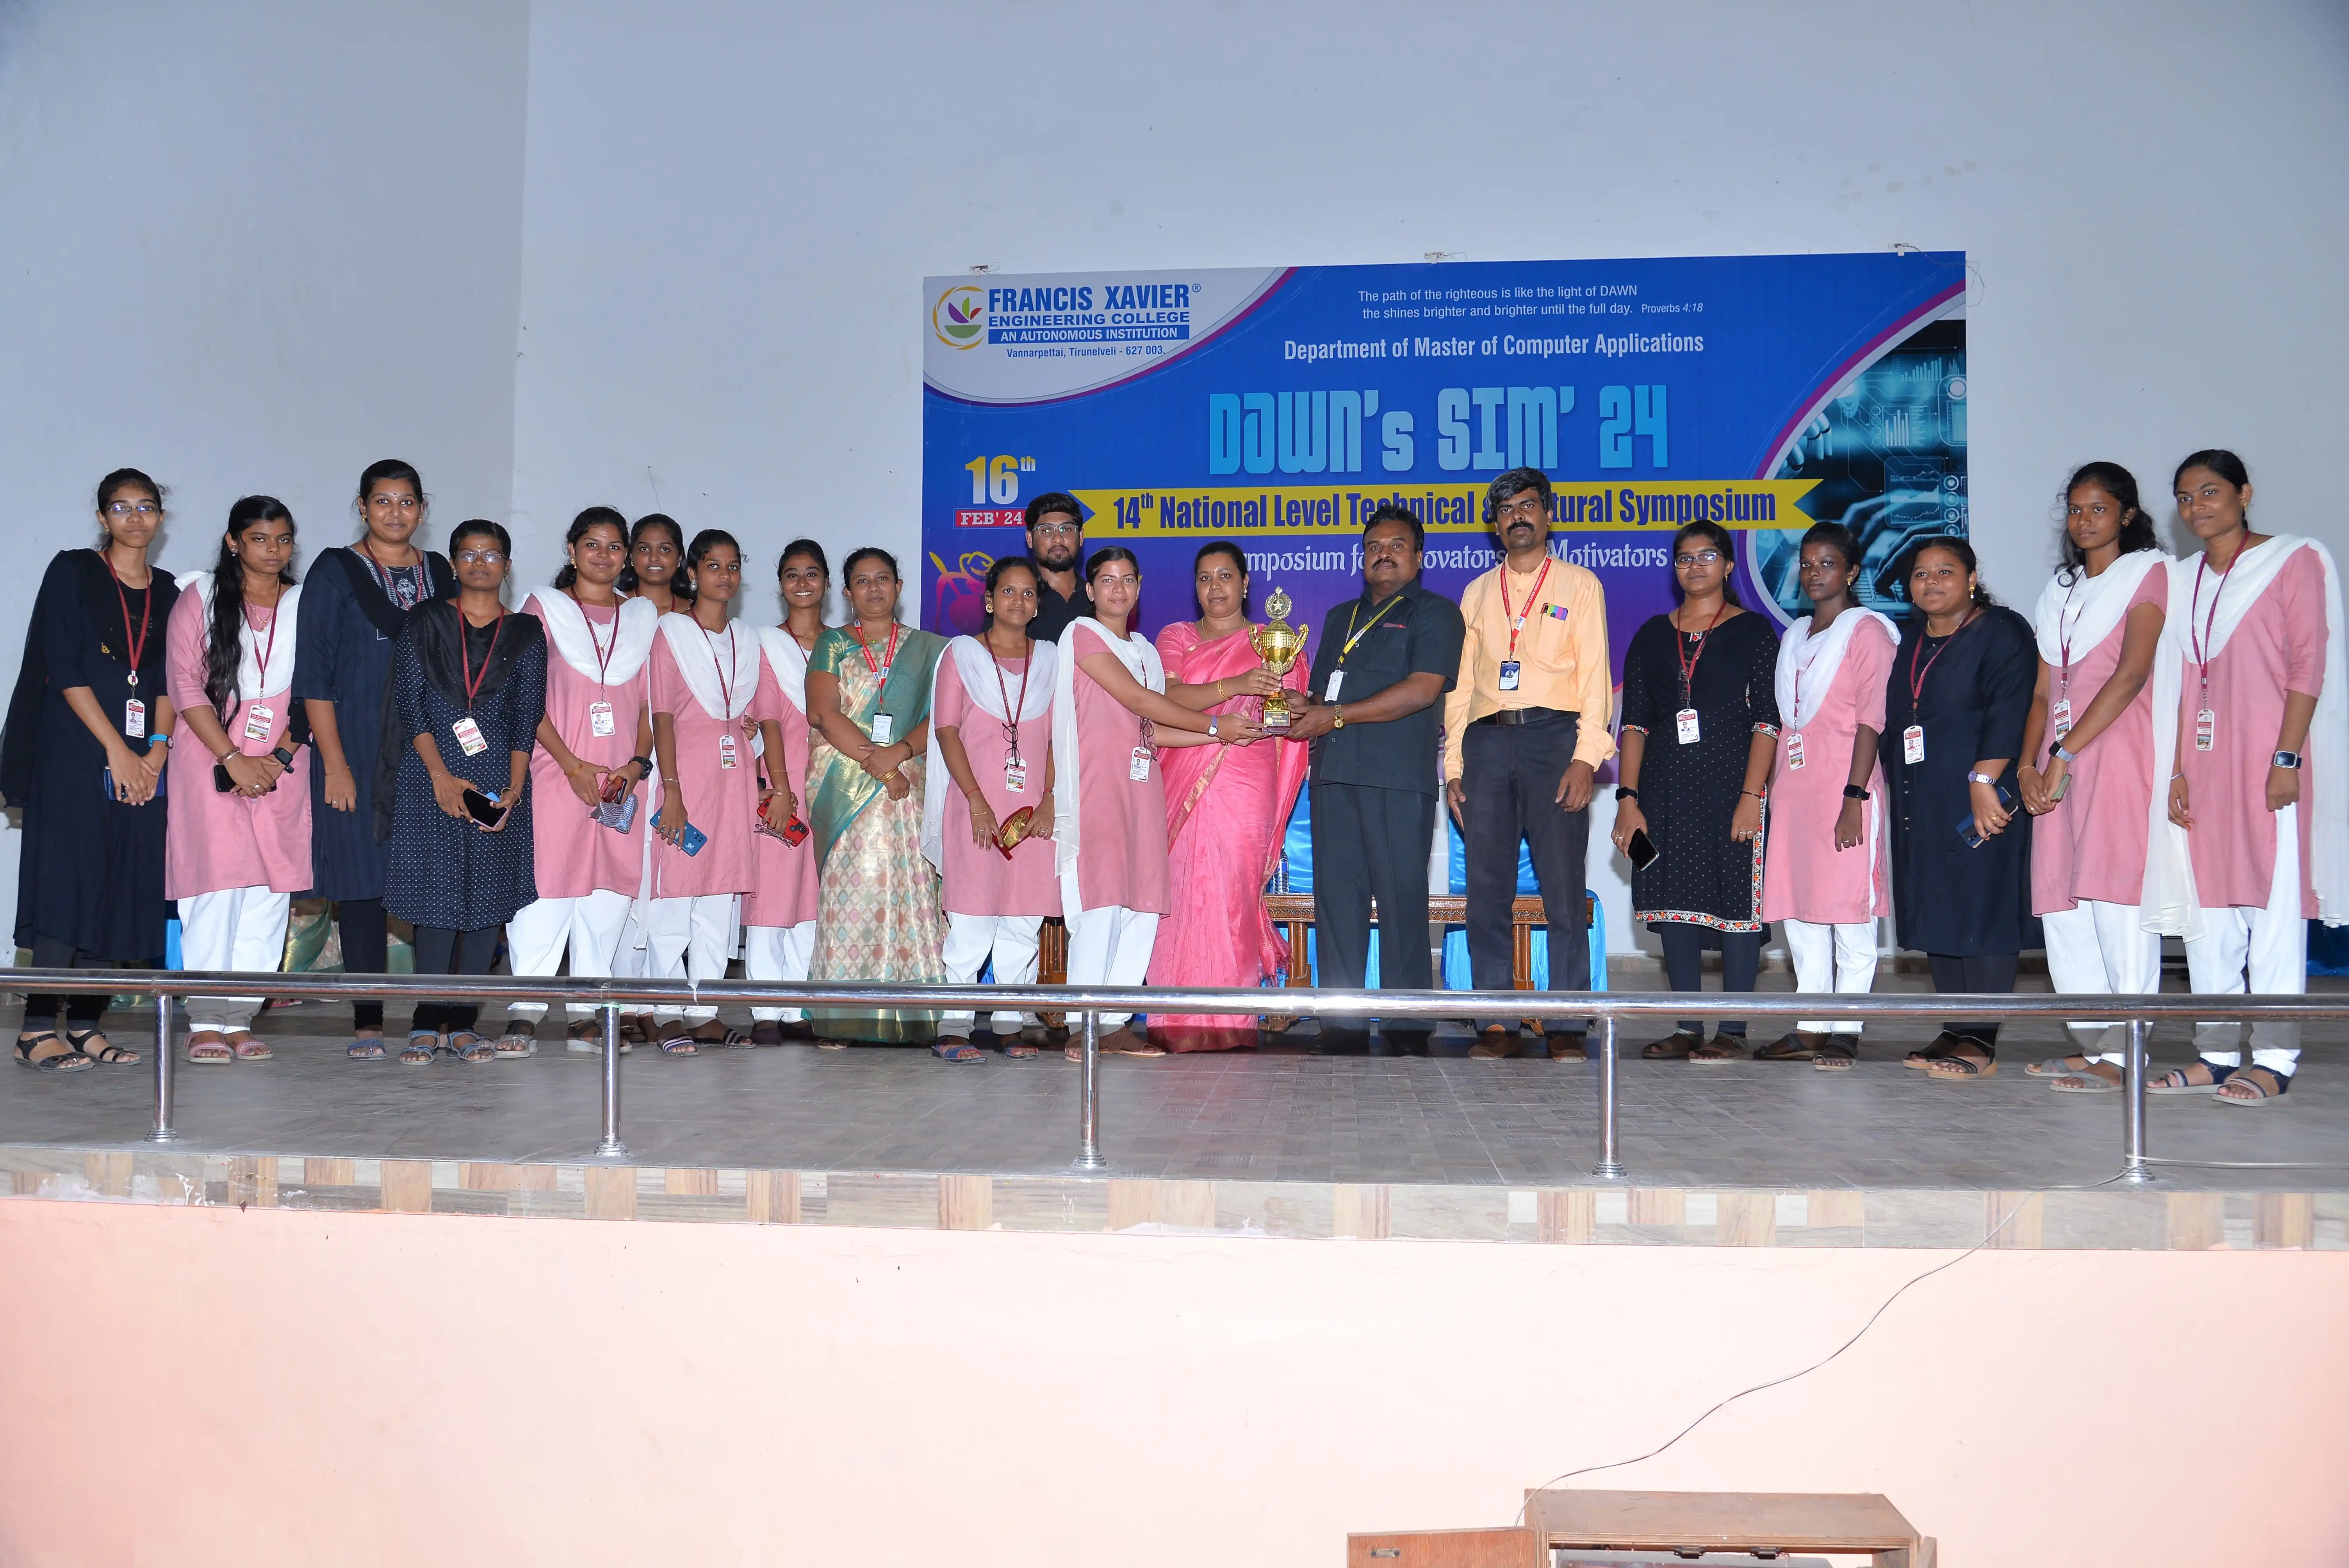 14TH NATIONAL LEVEL TECHNICAL AND CULTURAL symposium dawn’s sim 24